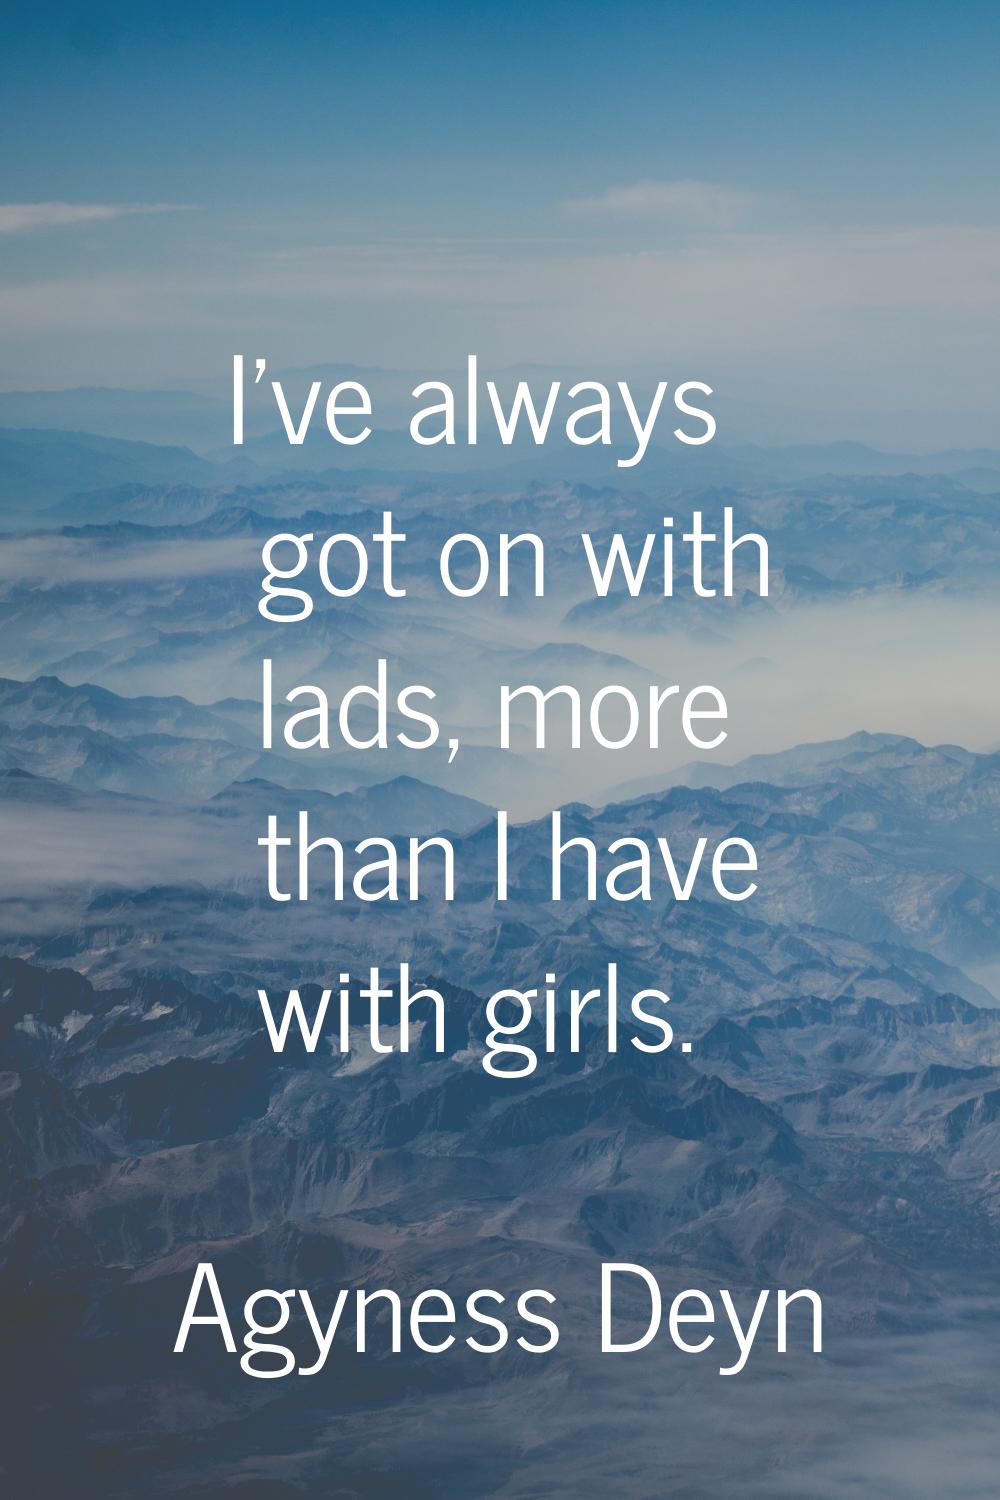 I've always got on with lads, more than I have with girls.